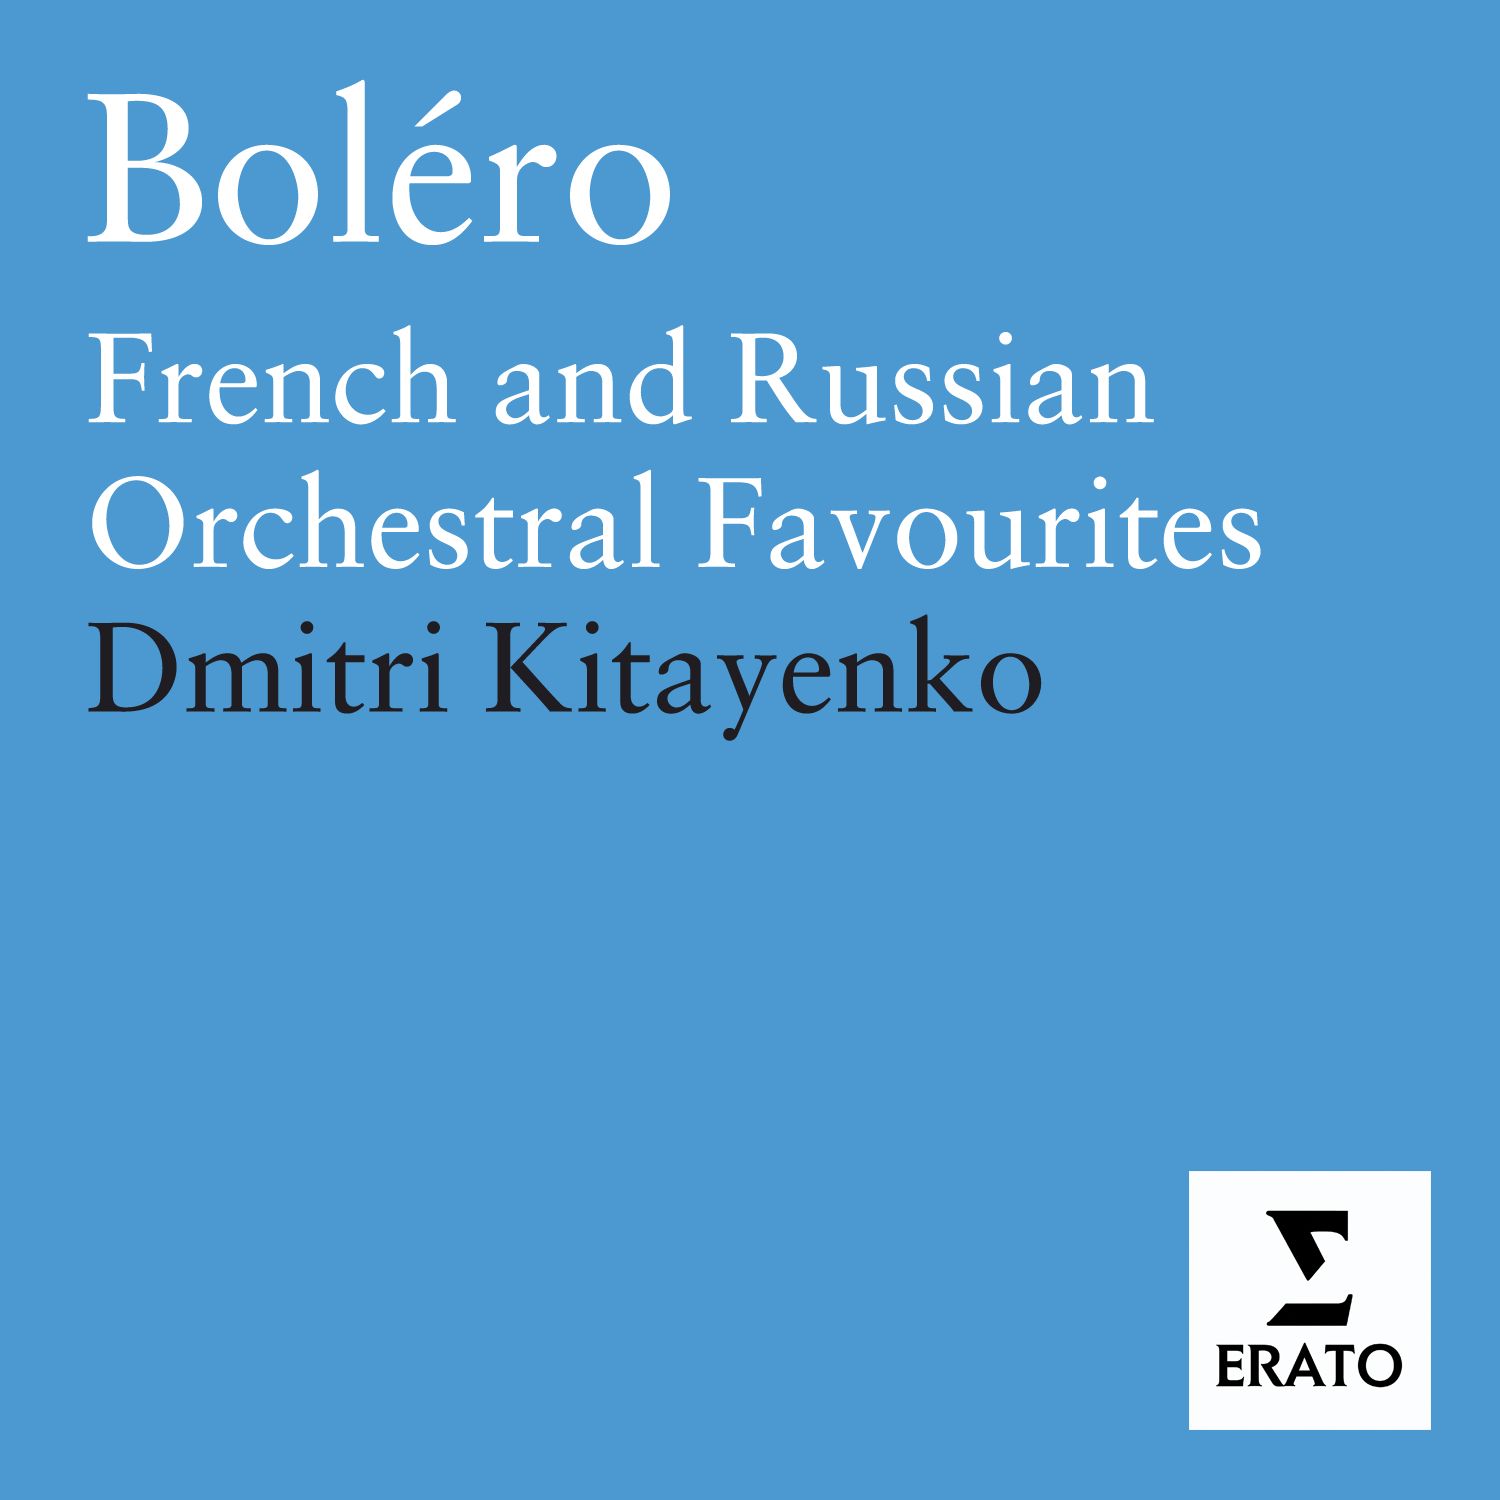 Bole ro  French and Russian orchestral favourites